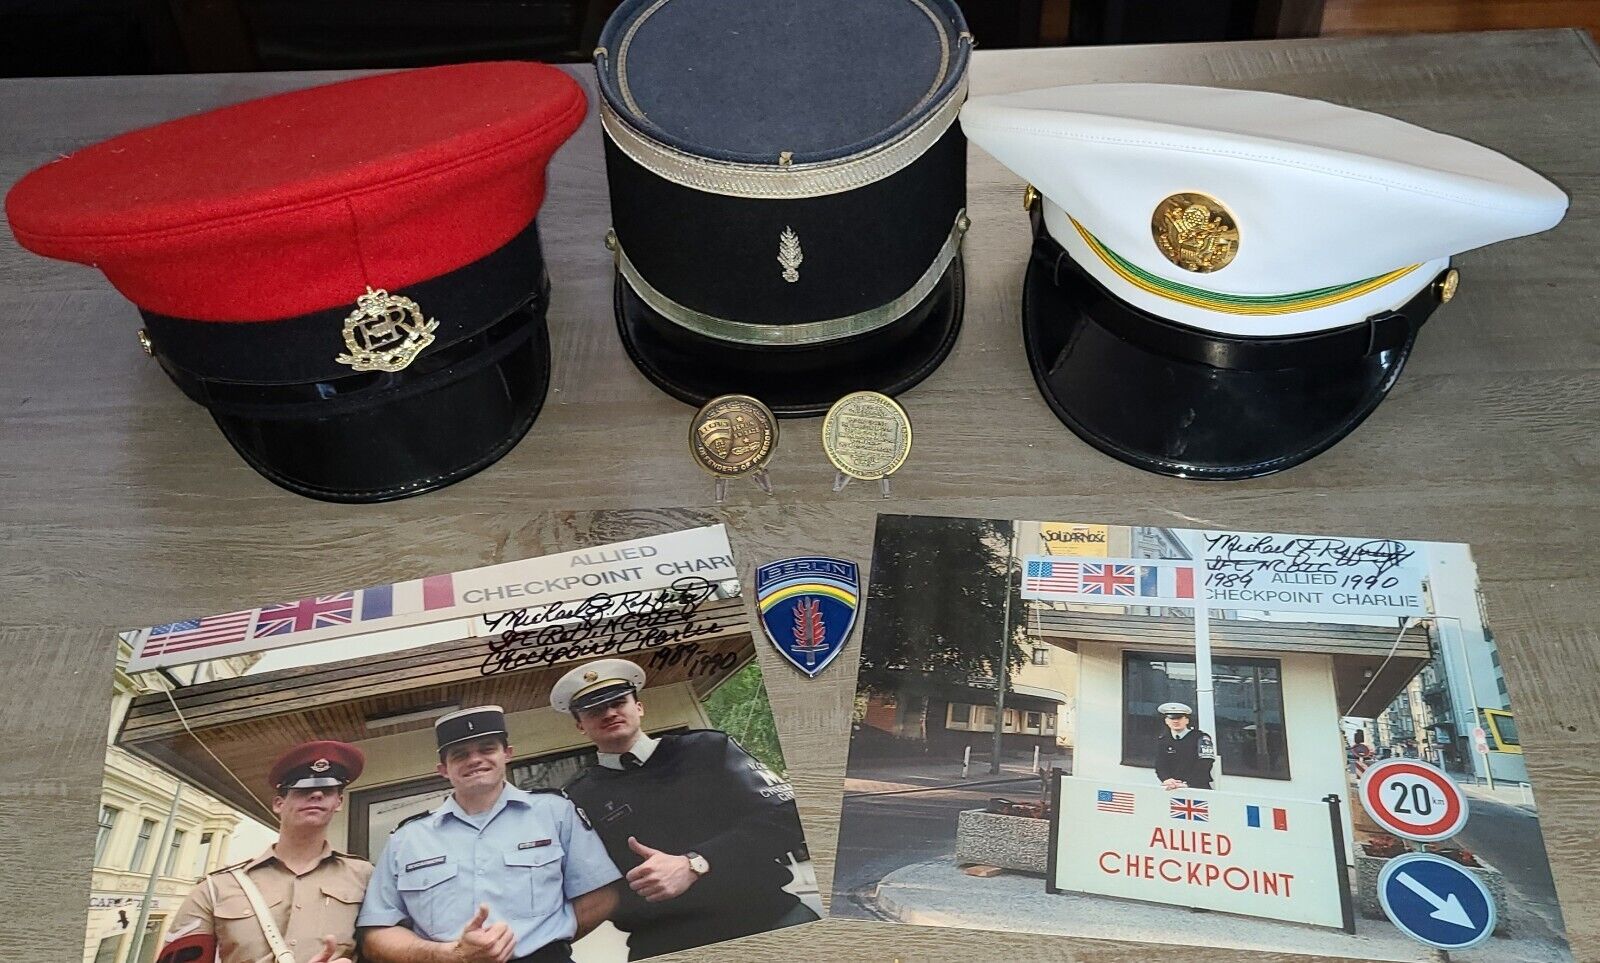 Military Police Hats Checkpoint Charlie, Berlin Brigade coins,  signed photos